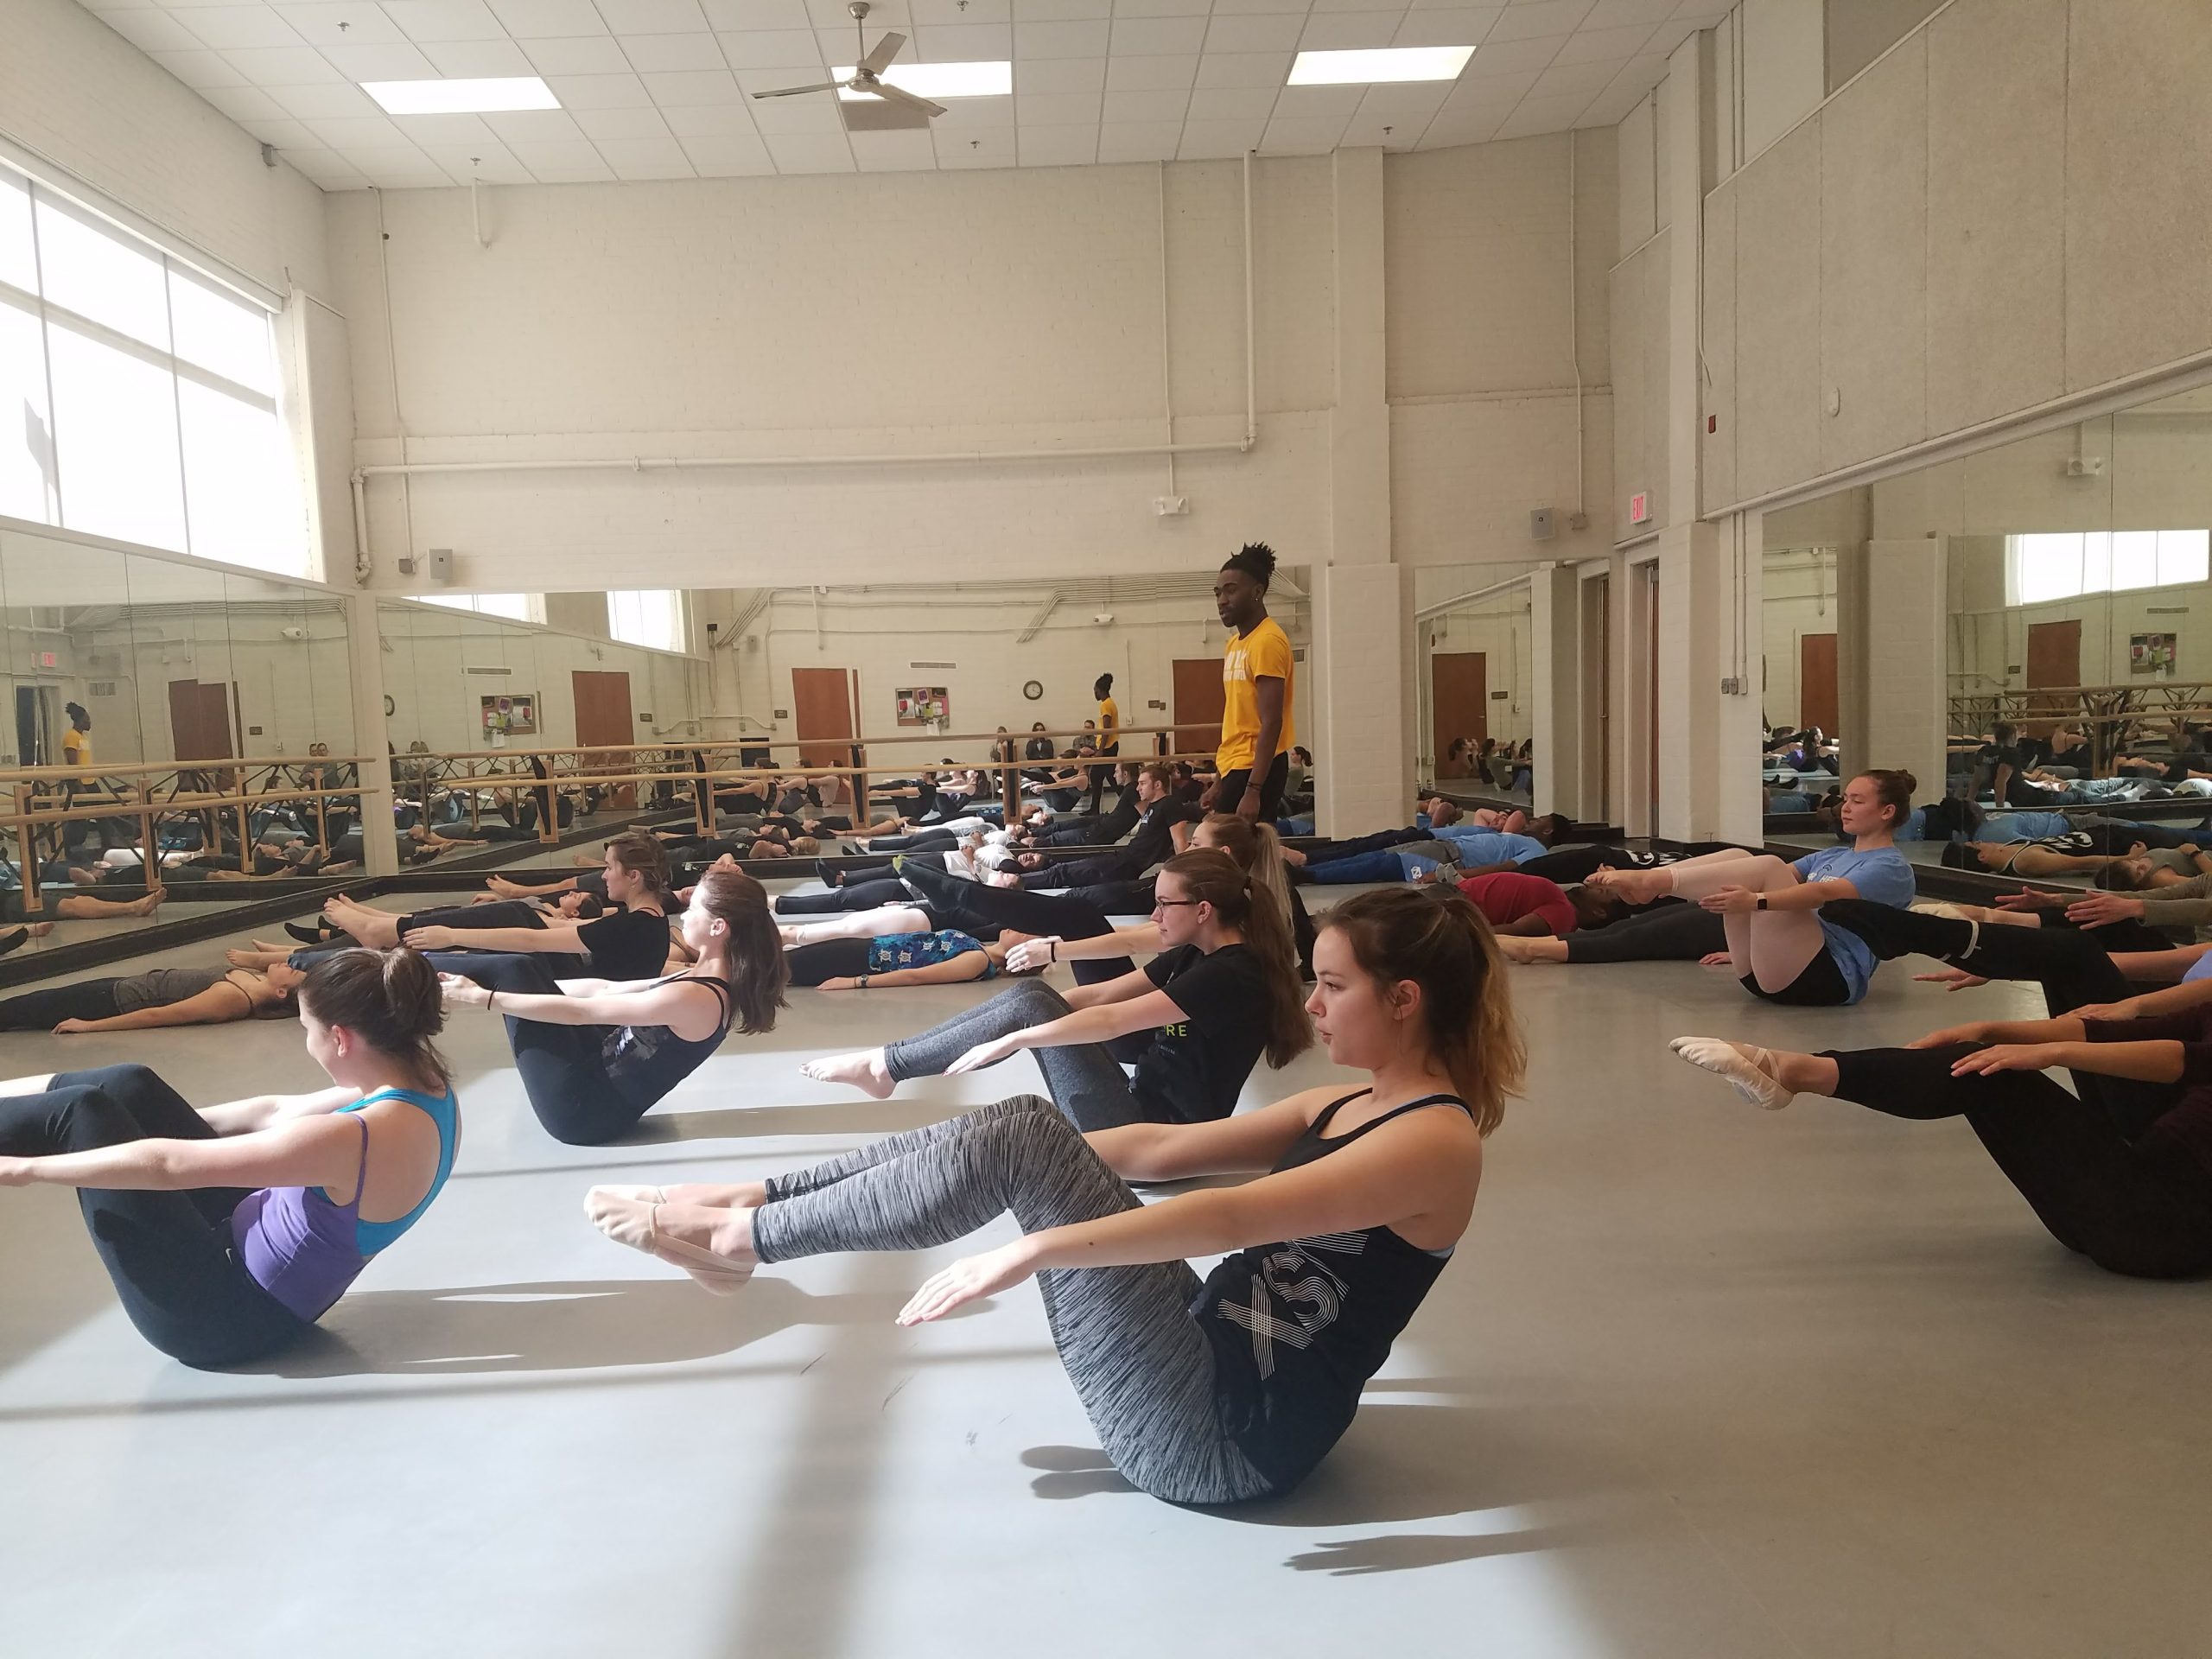 A picture of an instructor standing up and a room full of students in a dance class on the floor doing exercises